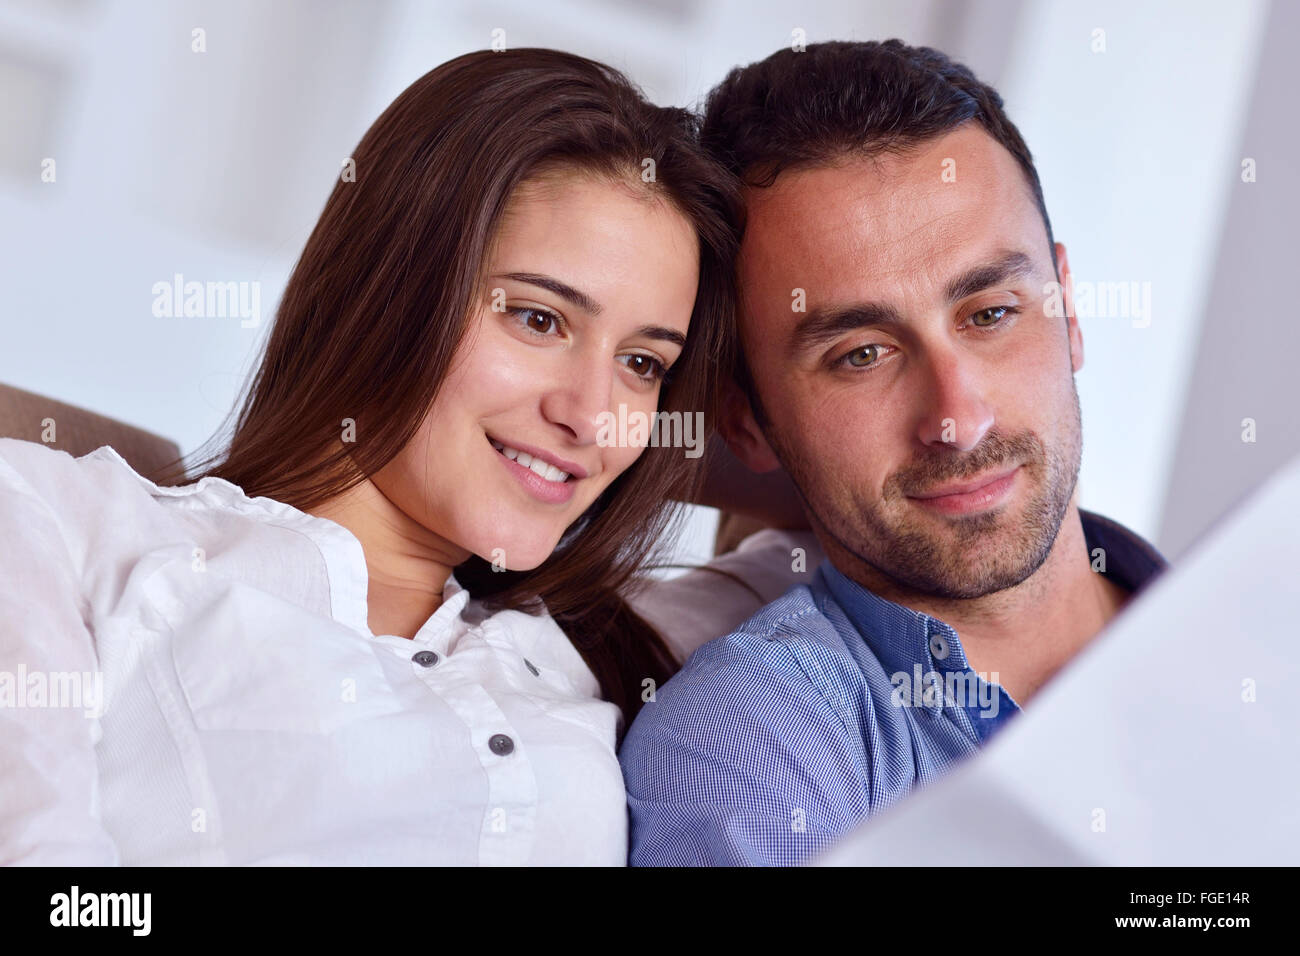 relaxed young couple working on laptop computer at home Stock Photo